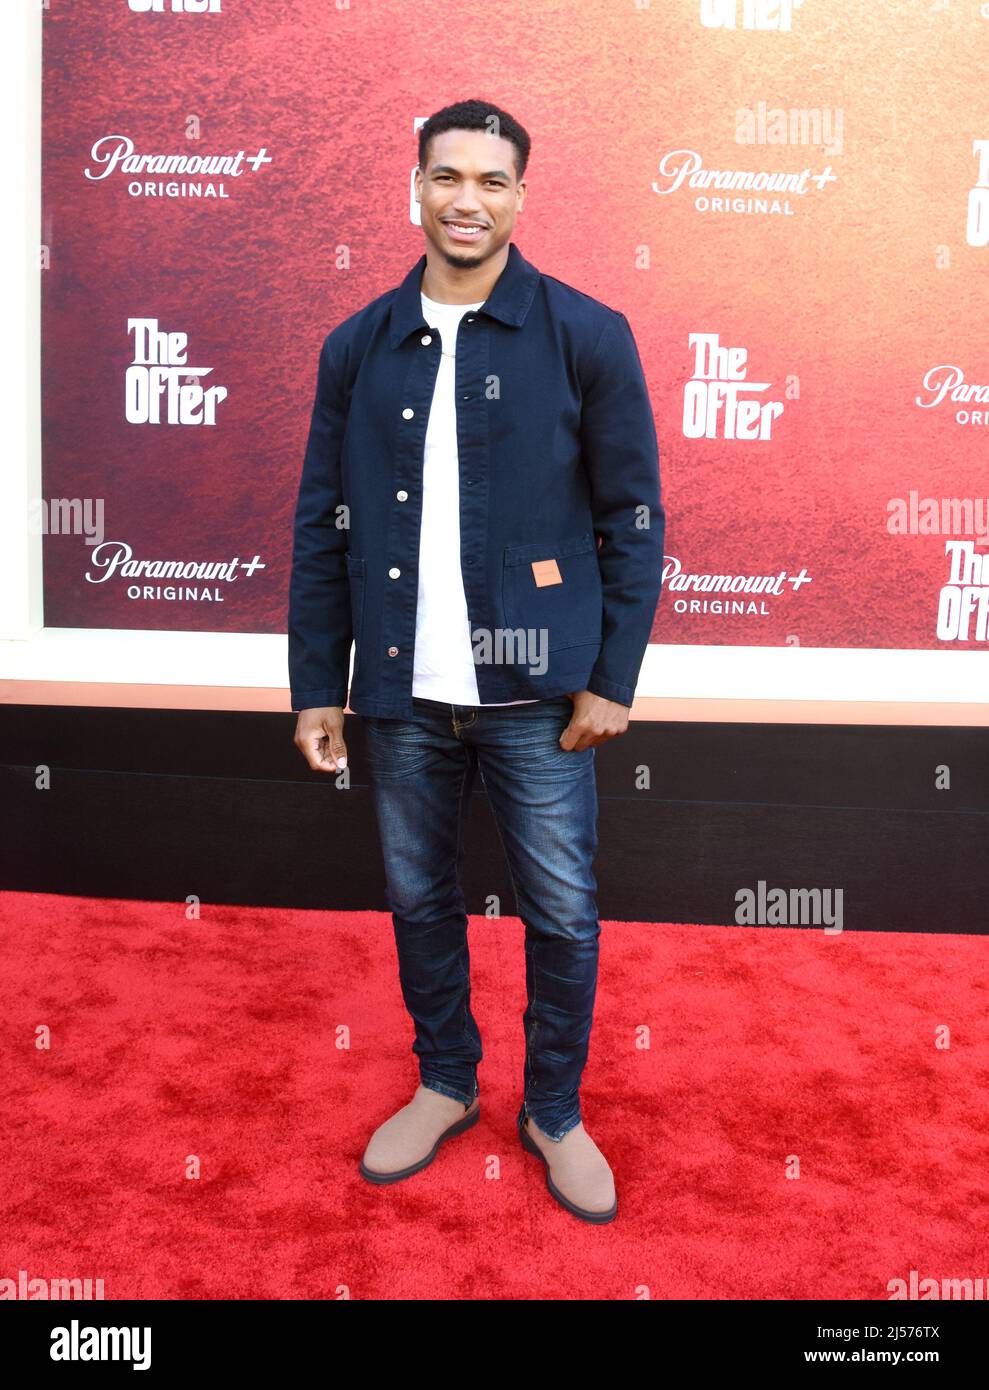 Los Angeles, California, USA 20th April 2022 Actor Greg Tarzan Davis attends Paramount+ Premiere of 'The Offer' at Paramount Studios on April 20, 2022 in Los Angeles, California, USA. Photo by Barry King/Alamy Live News Stock Photo